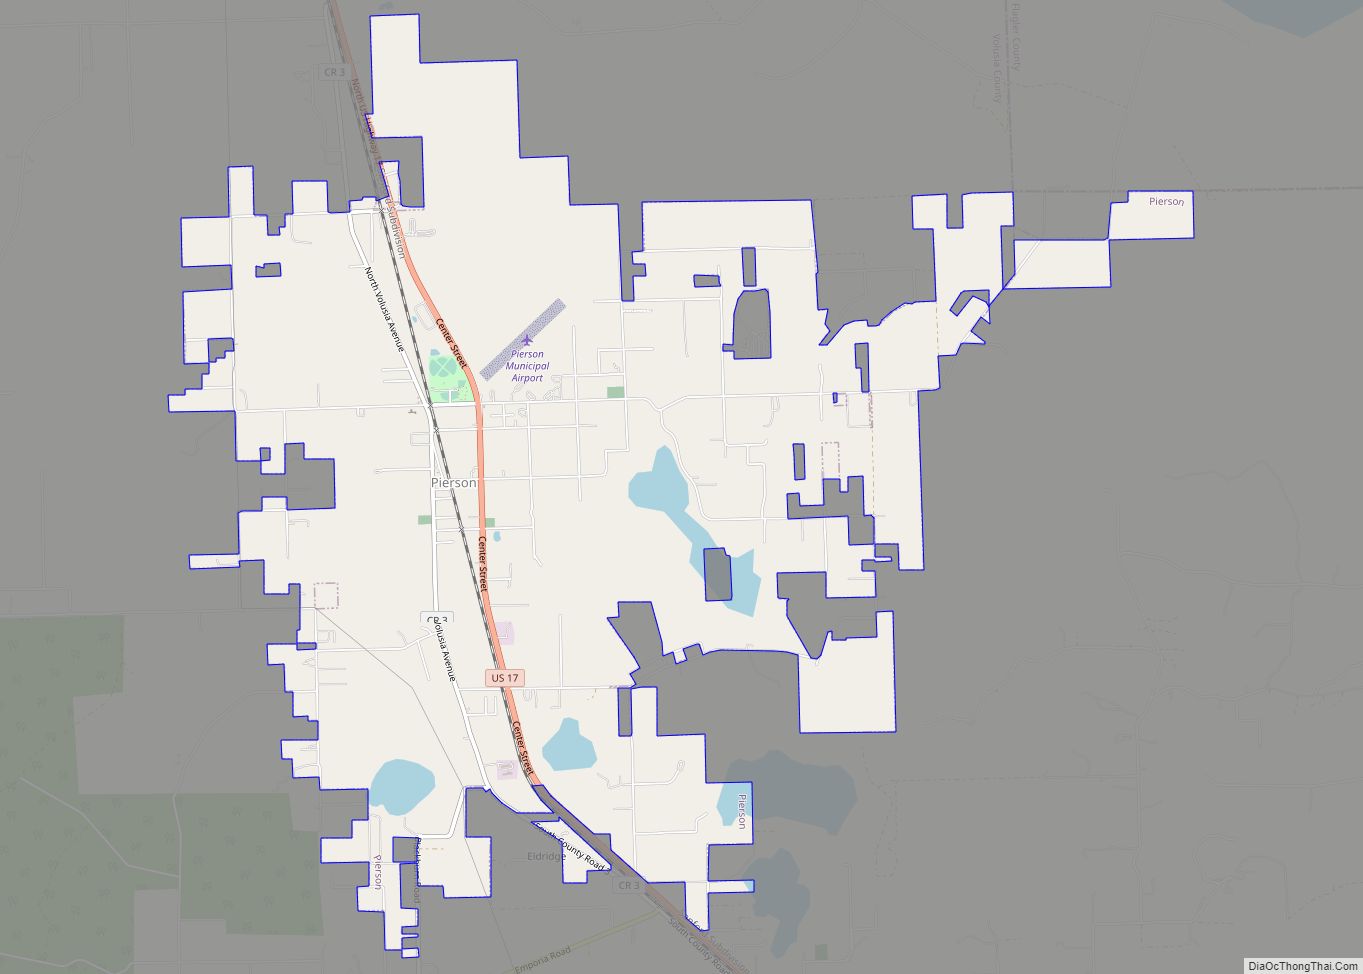 Map of Pierson town